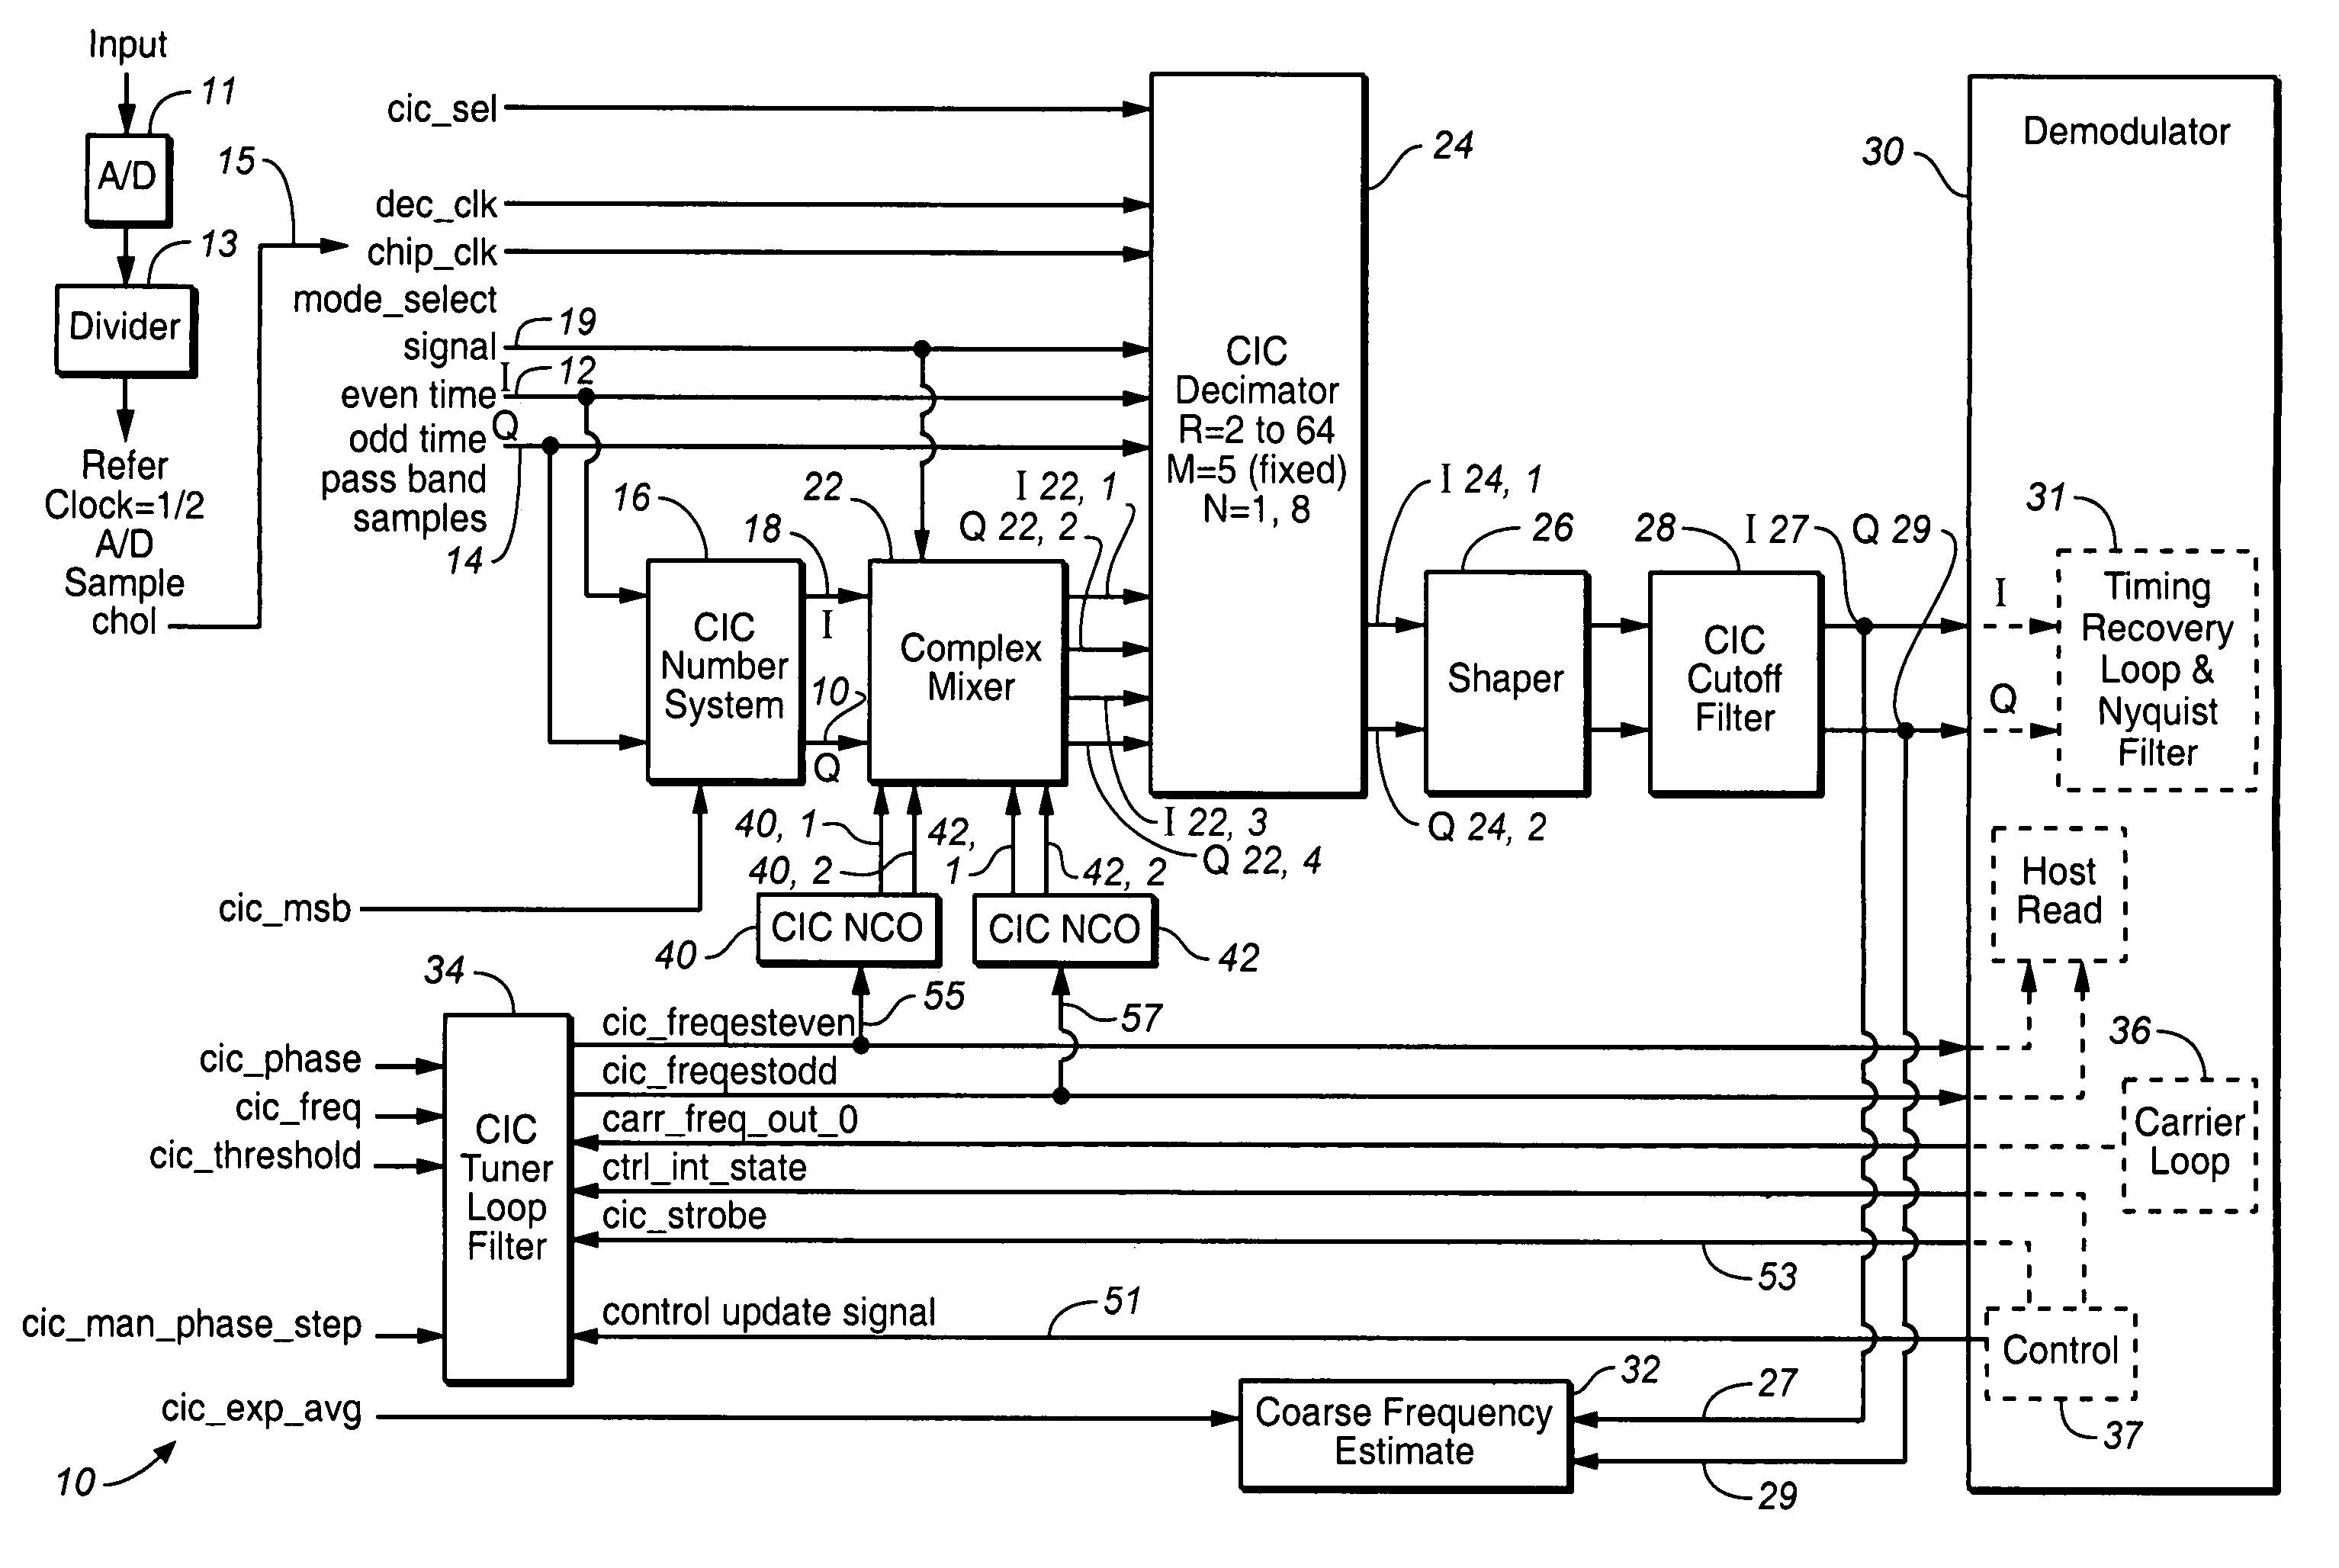 Frequency agile tuner and variable rate decimator for digital demodulator